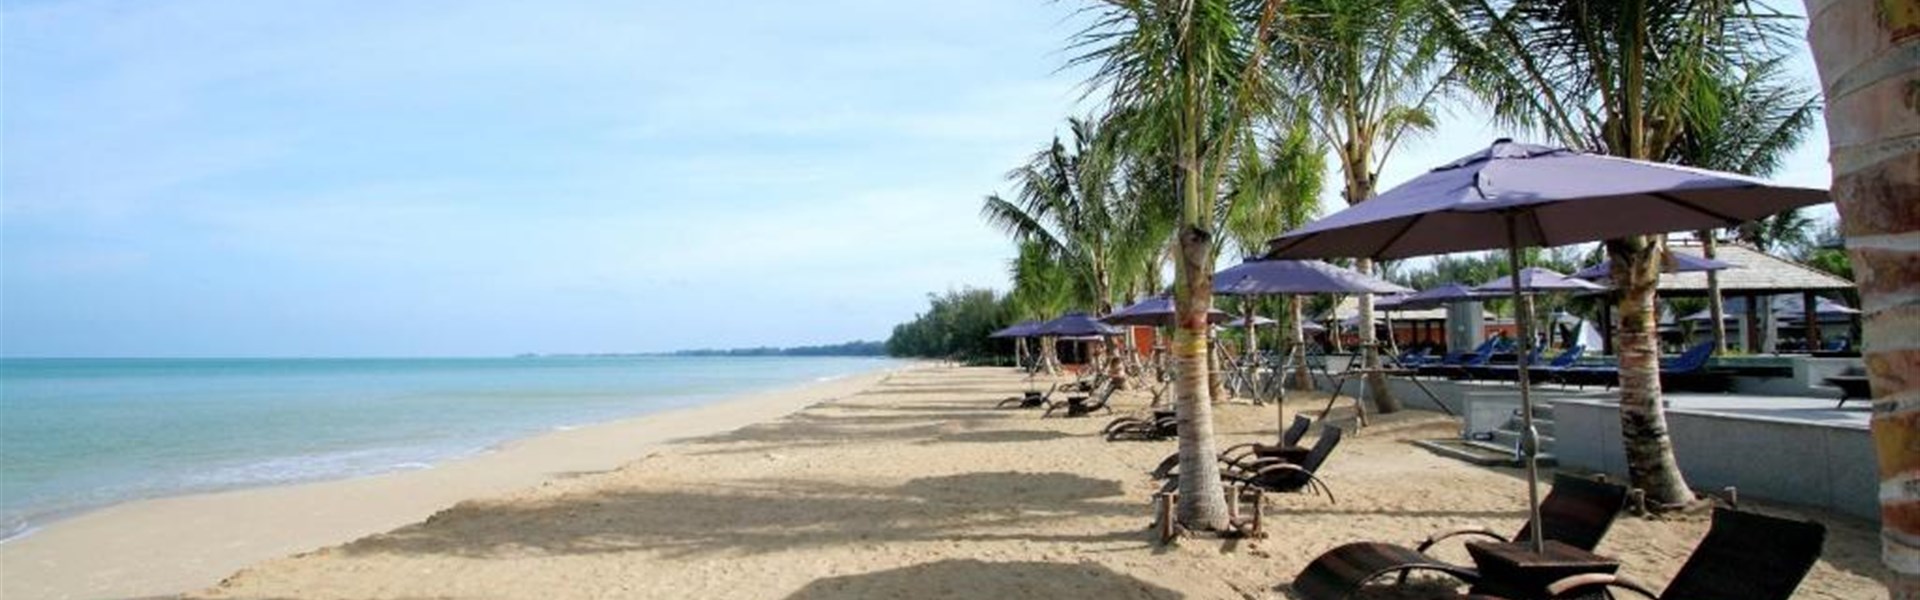 Marco Polo - Beyond Resort Khao Lak 4* - ADULTS ONLY - 